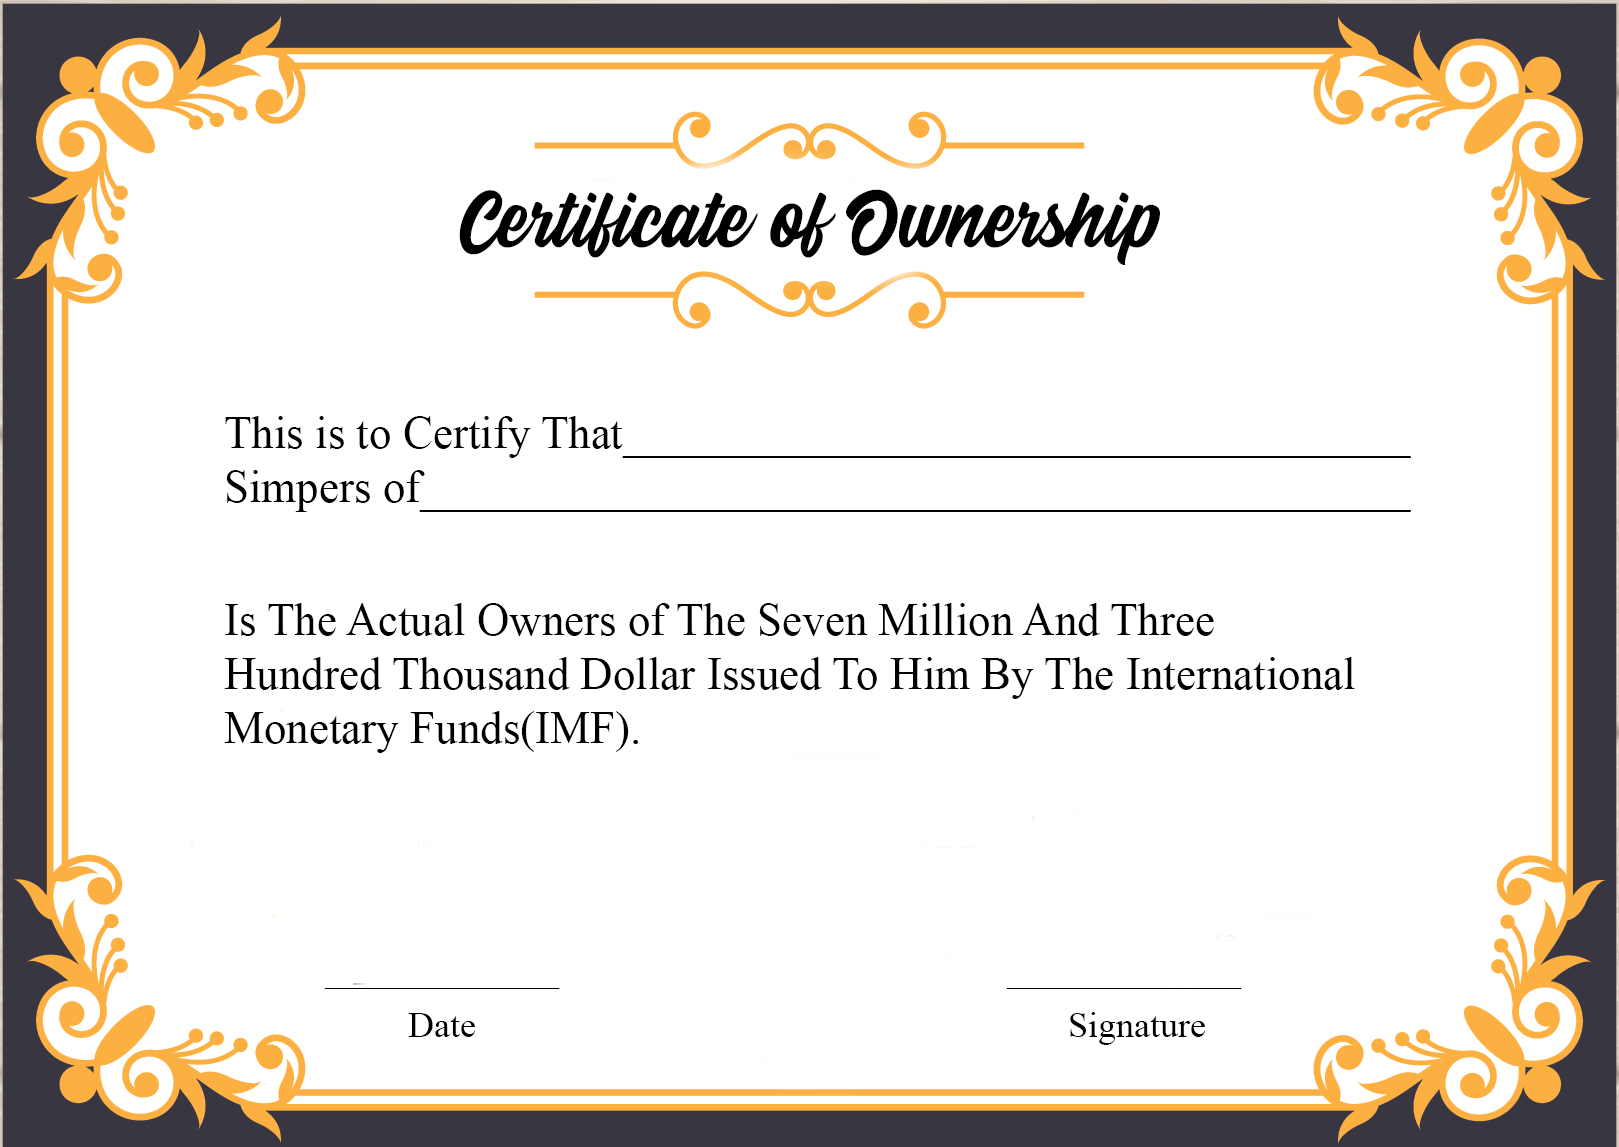 Free Sample Certificate Of Ownership Templates | Certificate In Certificate Of Ownership Template